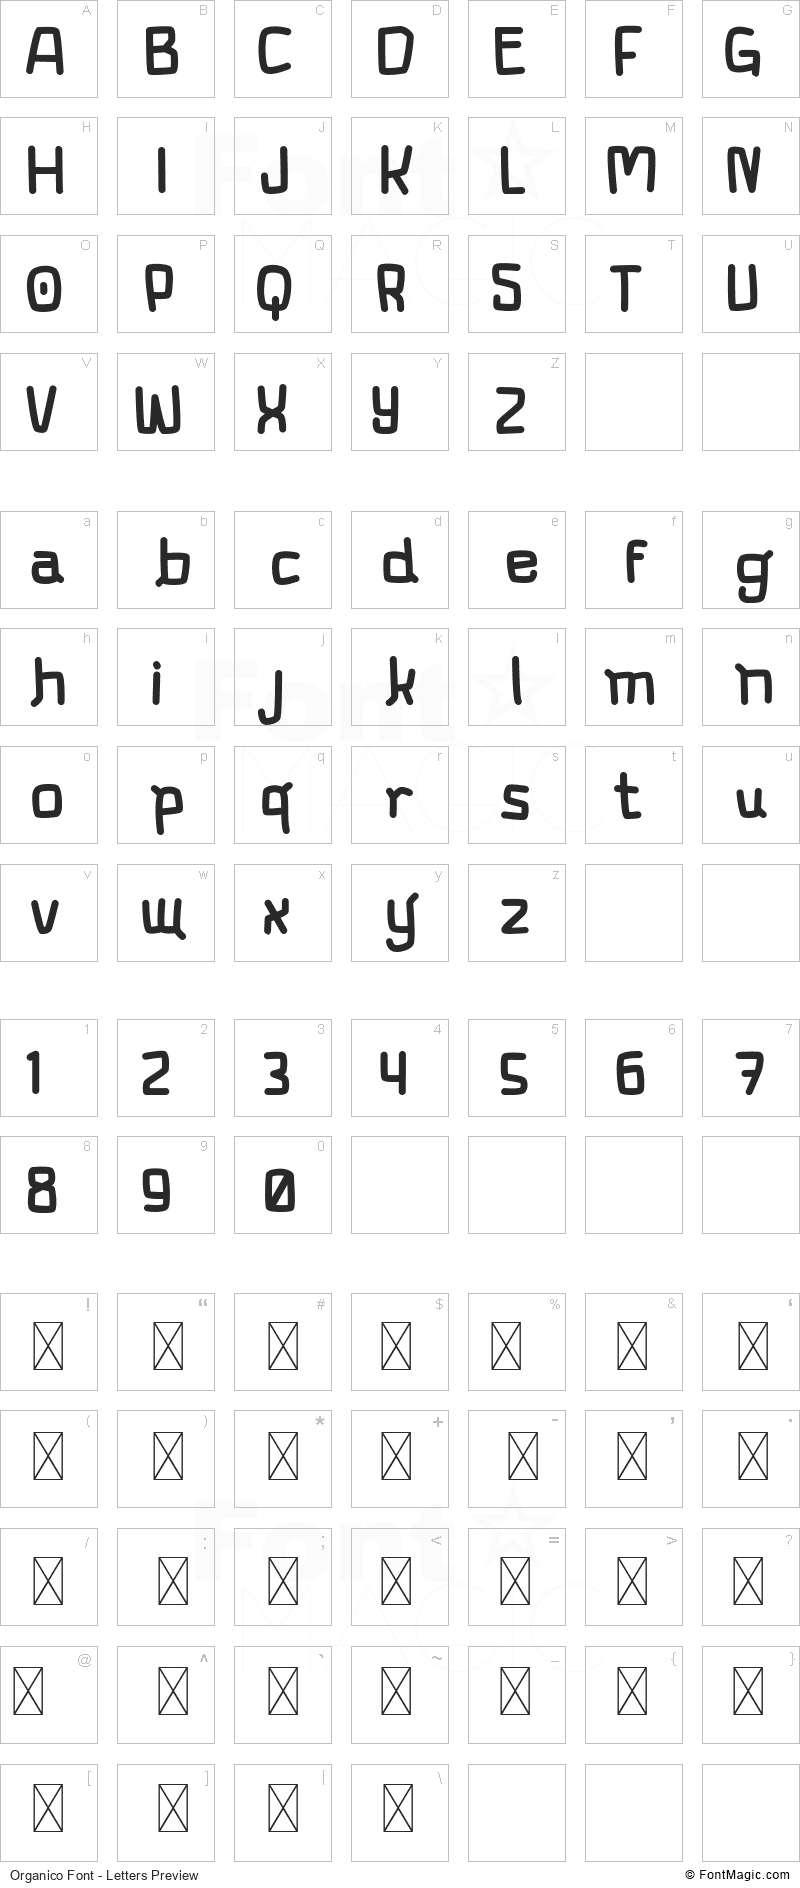 Organico Font - All Latters Preview Chart